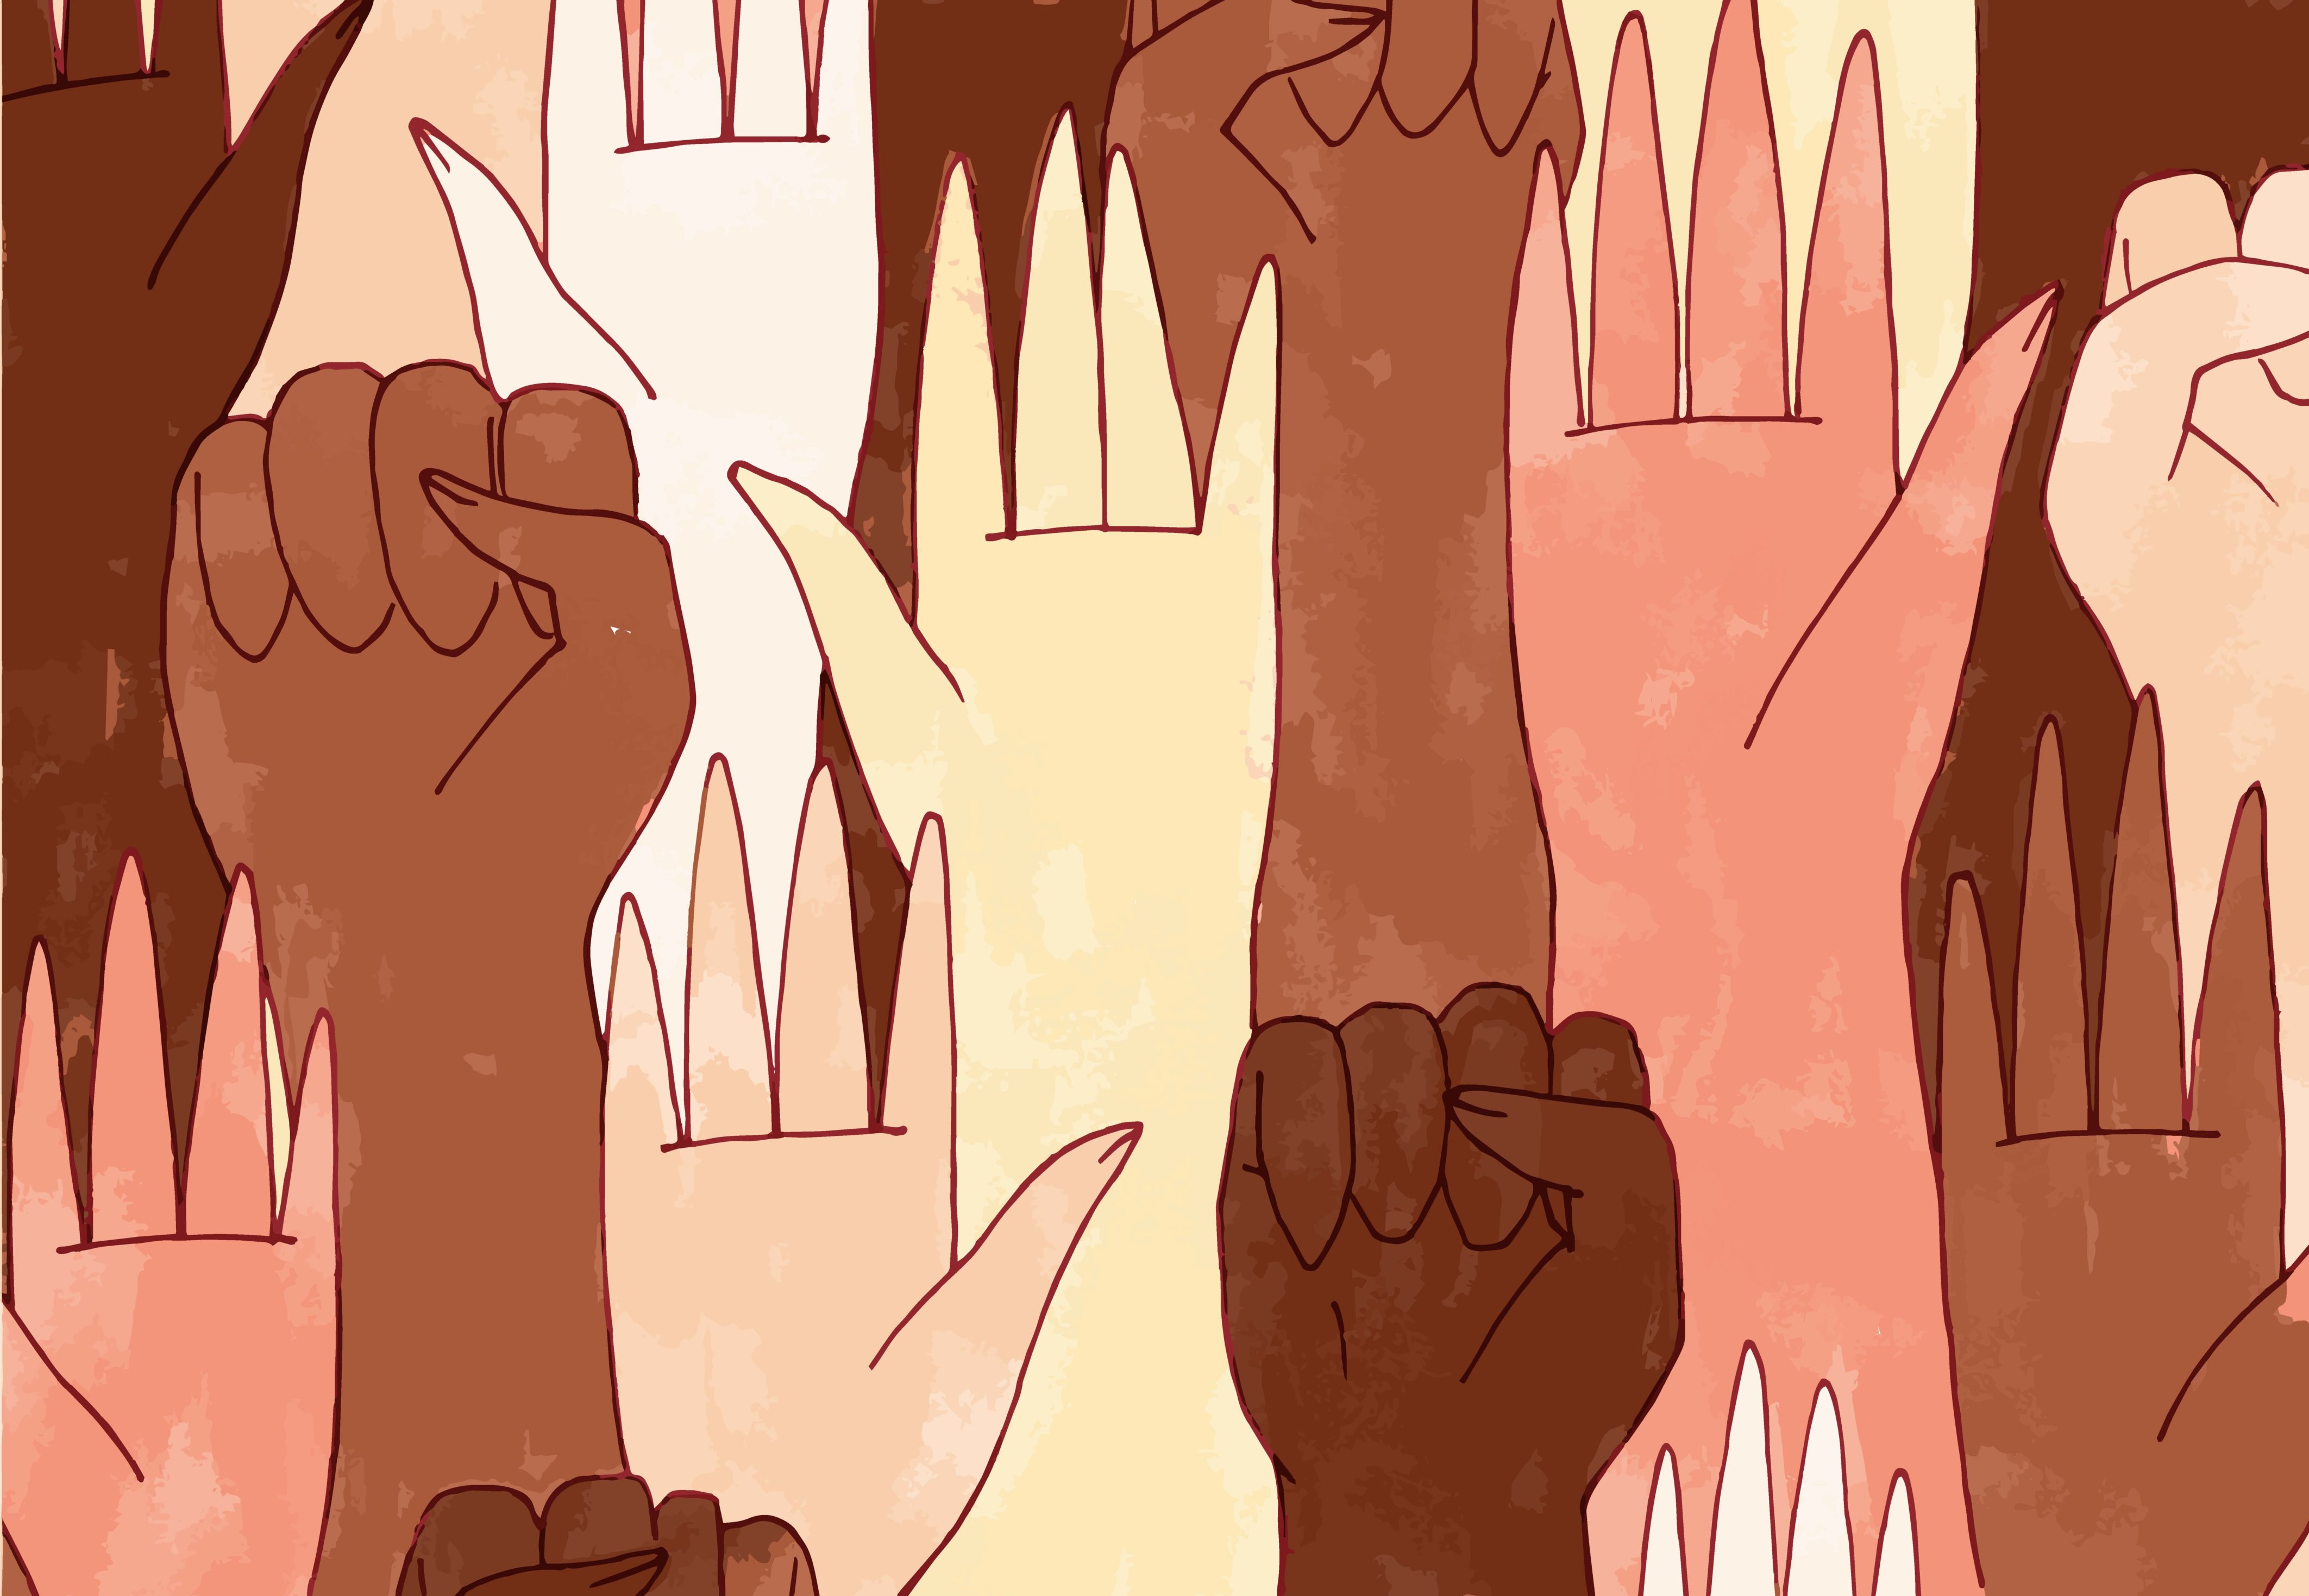 hands raised, different colors of skin